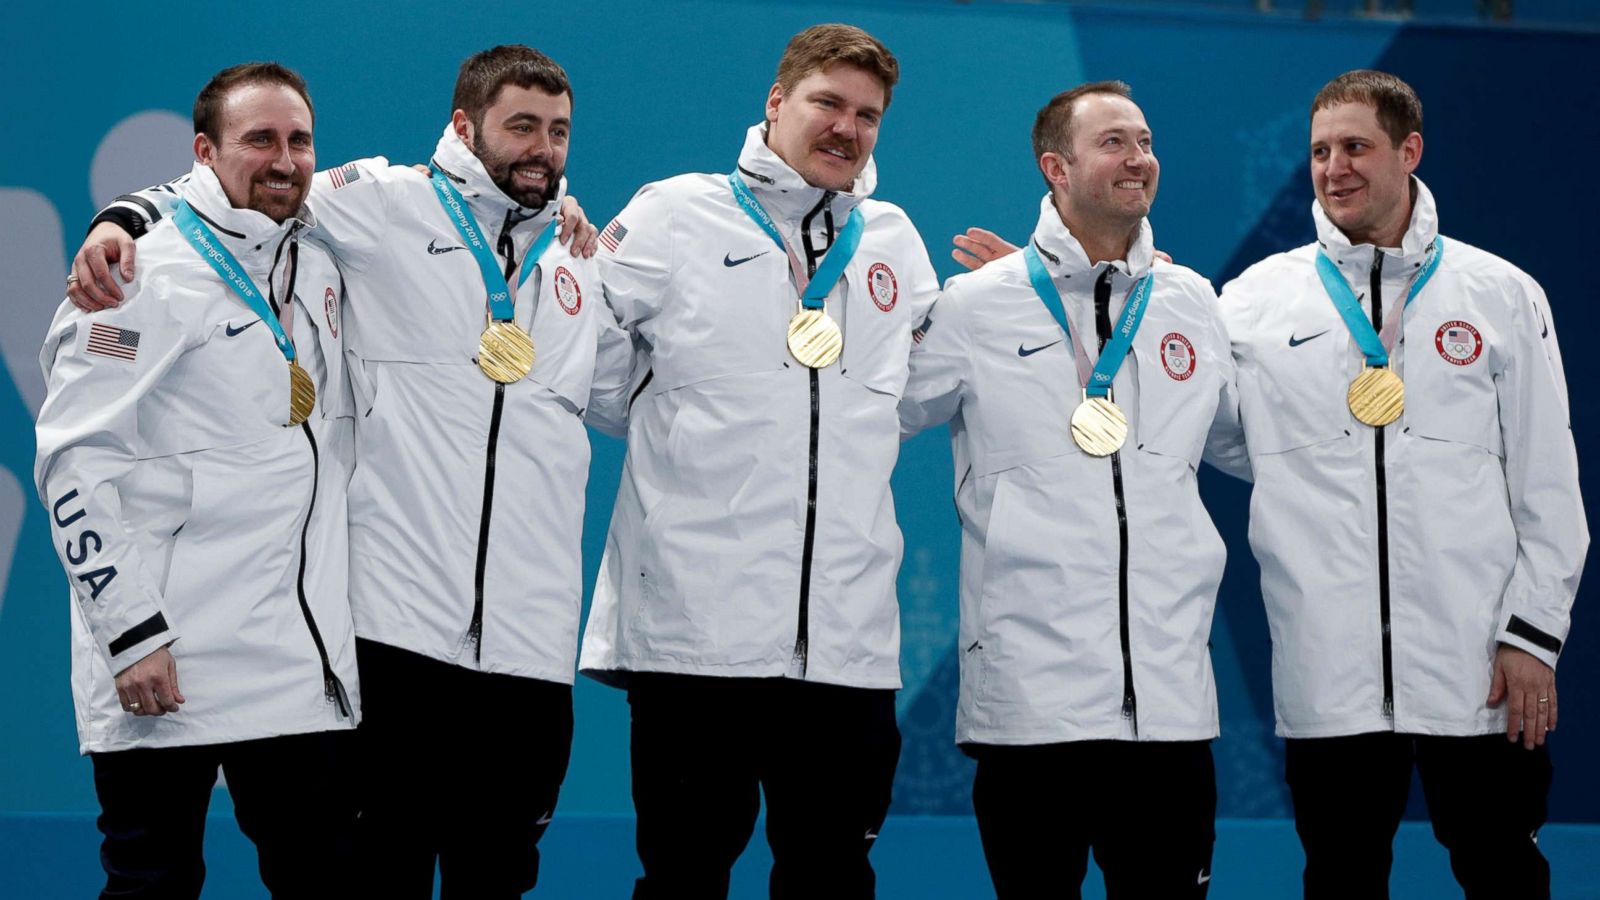 American Men S Curling Team Wins Gold Medal For 1st Time Ever At Olympics 18 Abc News